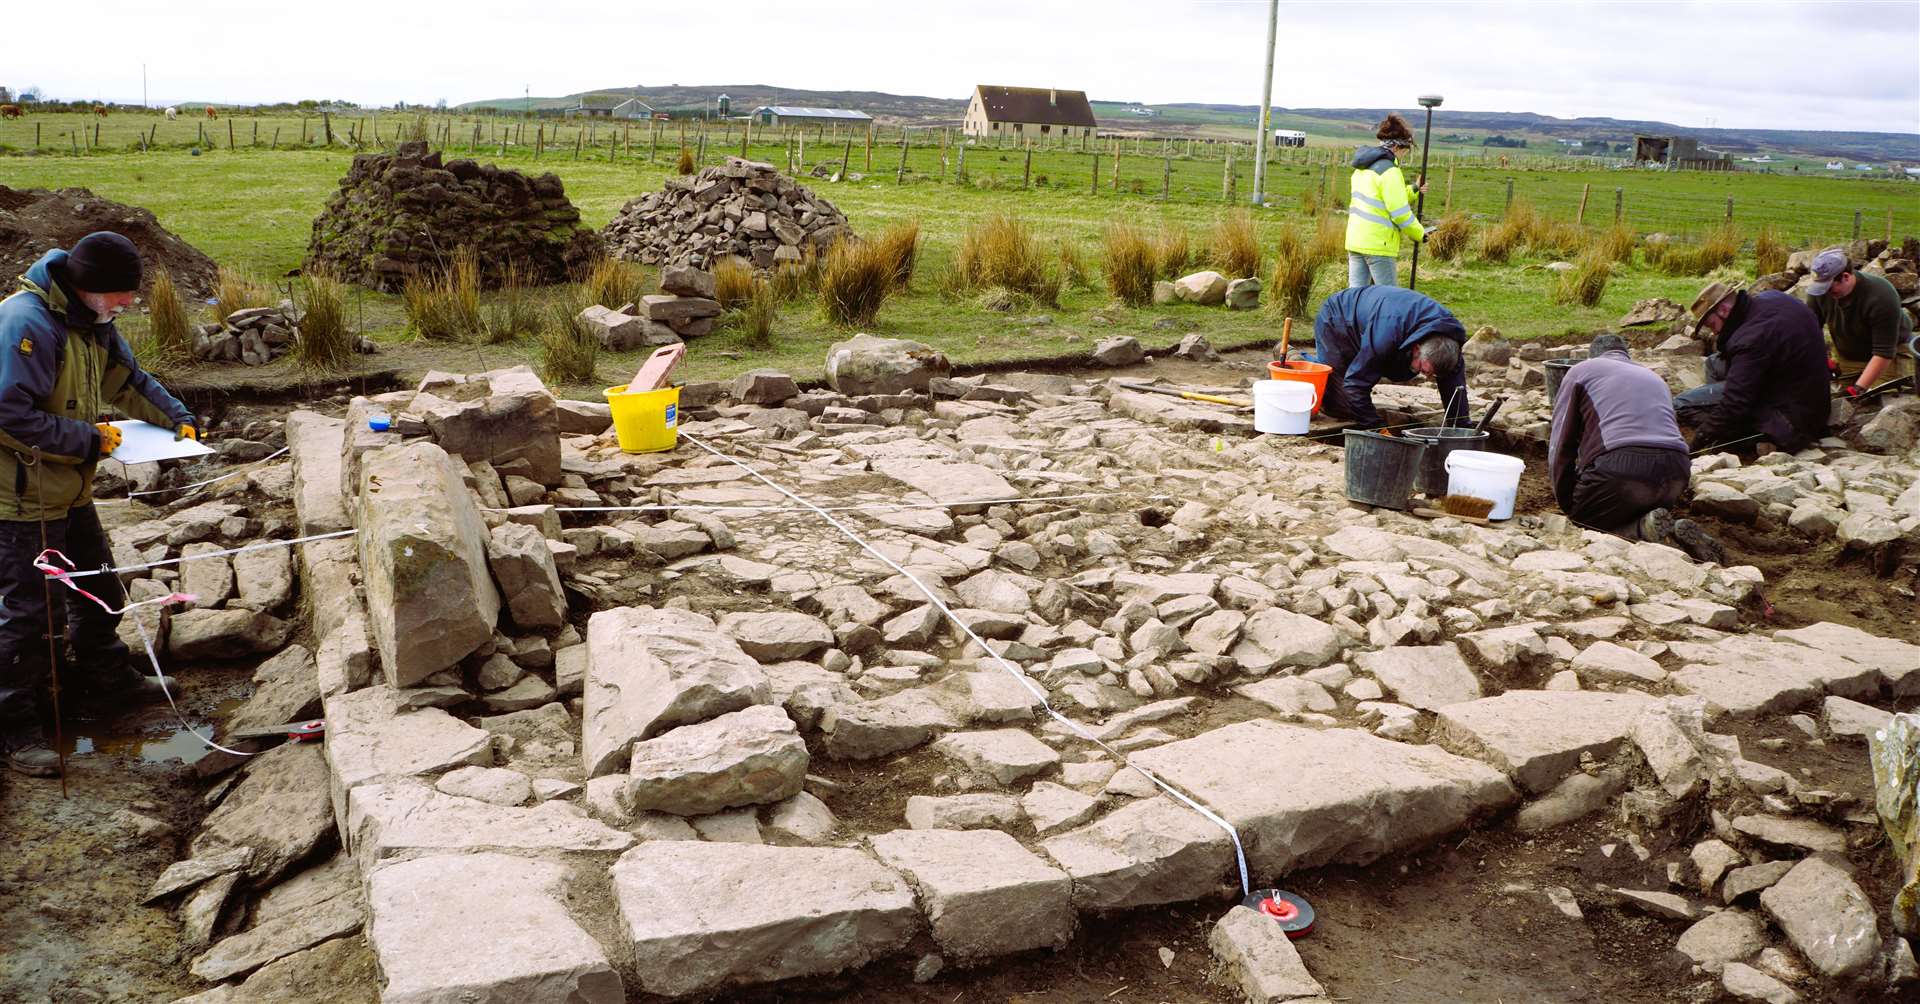 Very few of these byre dwelling houses have been excavated in Caithness despite many ruins existing. Picture: DGS